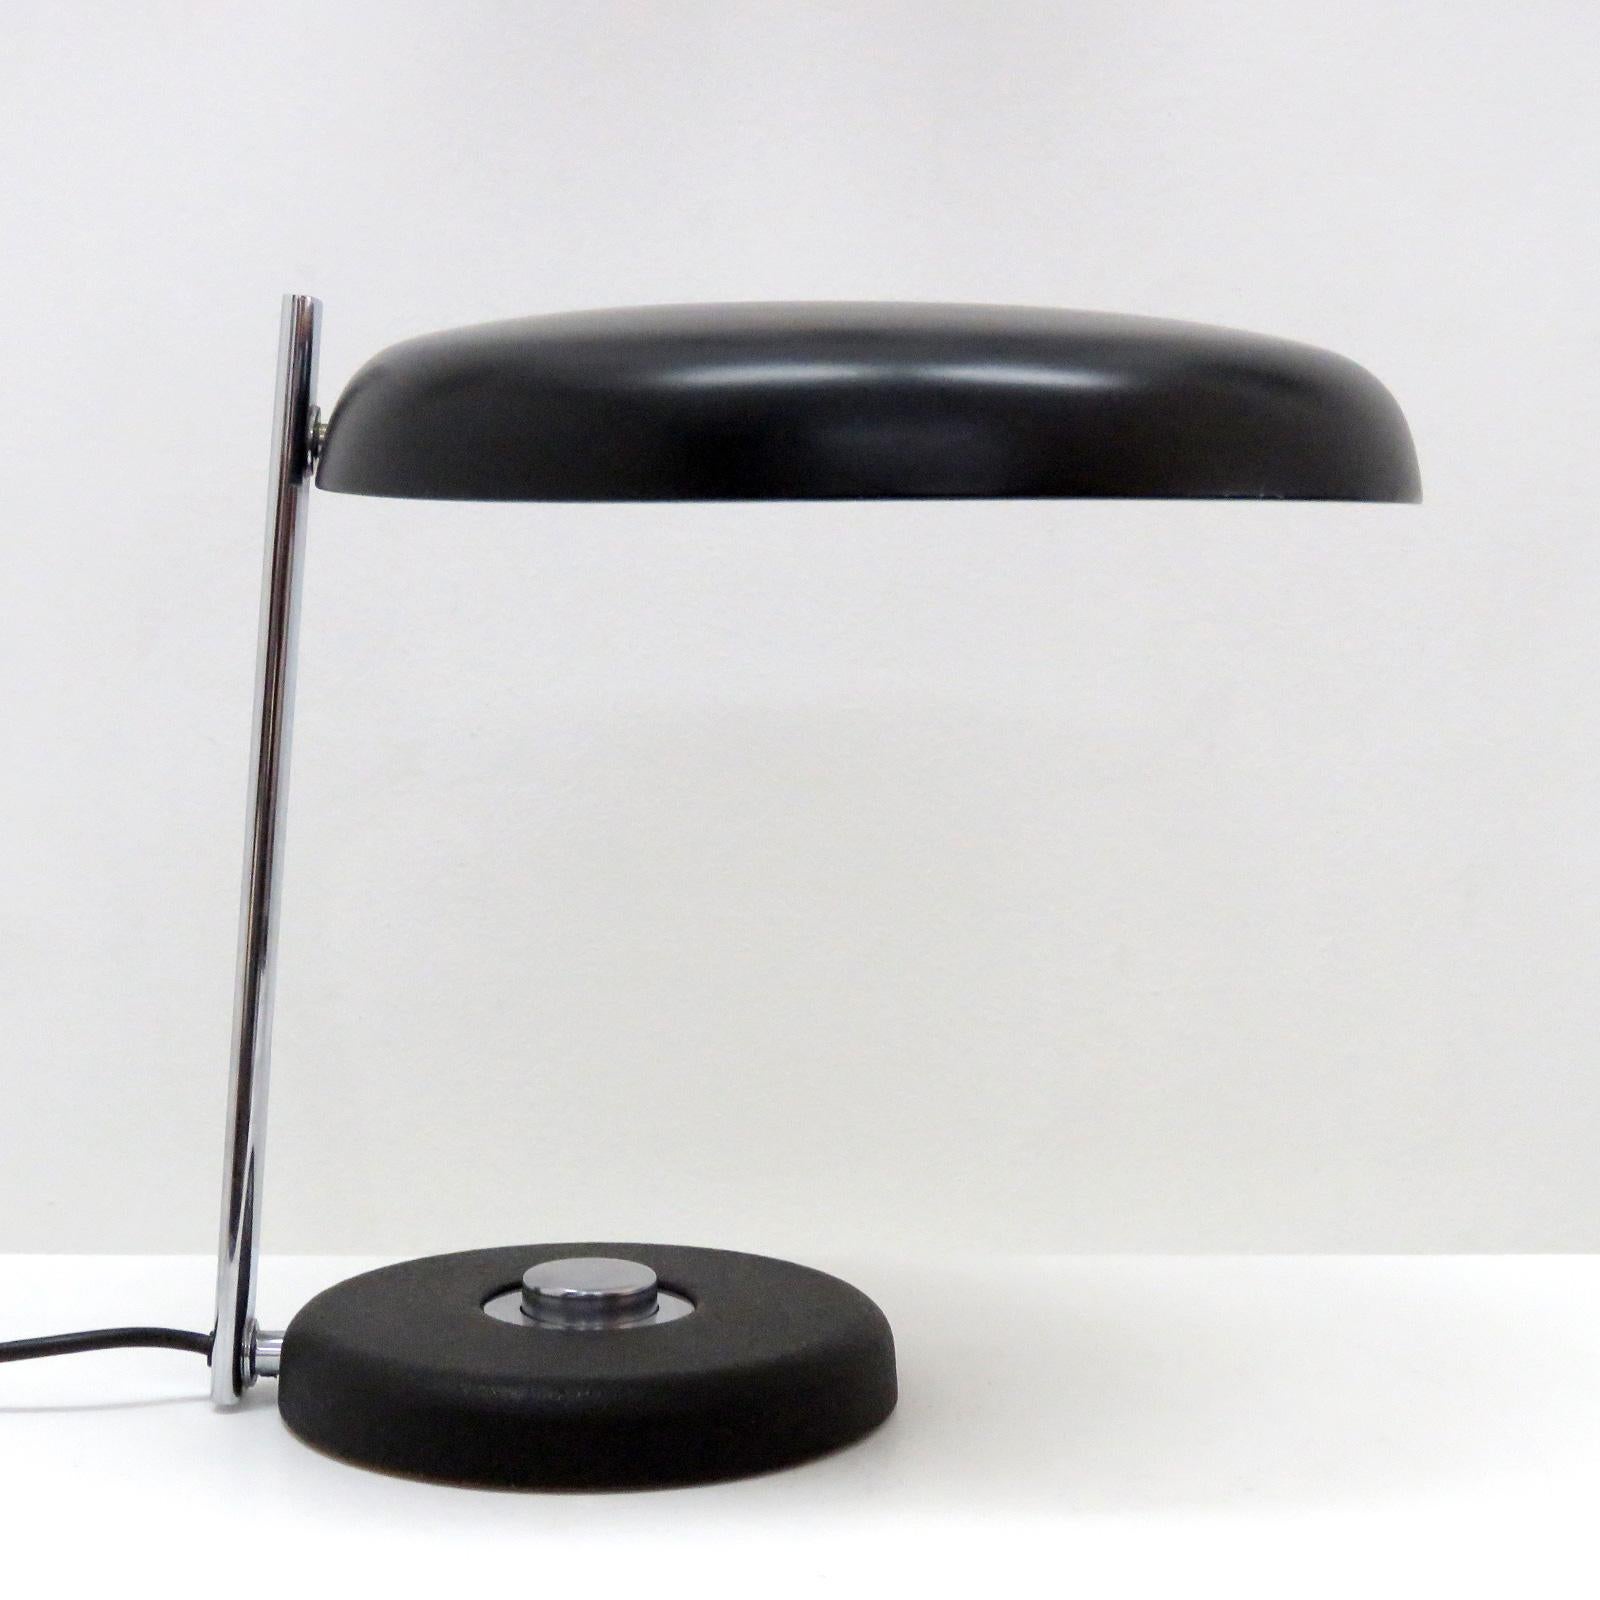 Wonderful table lamp 'Oslo' by Heinz Pfänder for Hillebrand, 1962, in chrome-plated and black enameled metal, on/off switch at the base, shade and arm rotate.